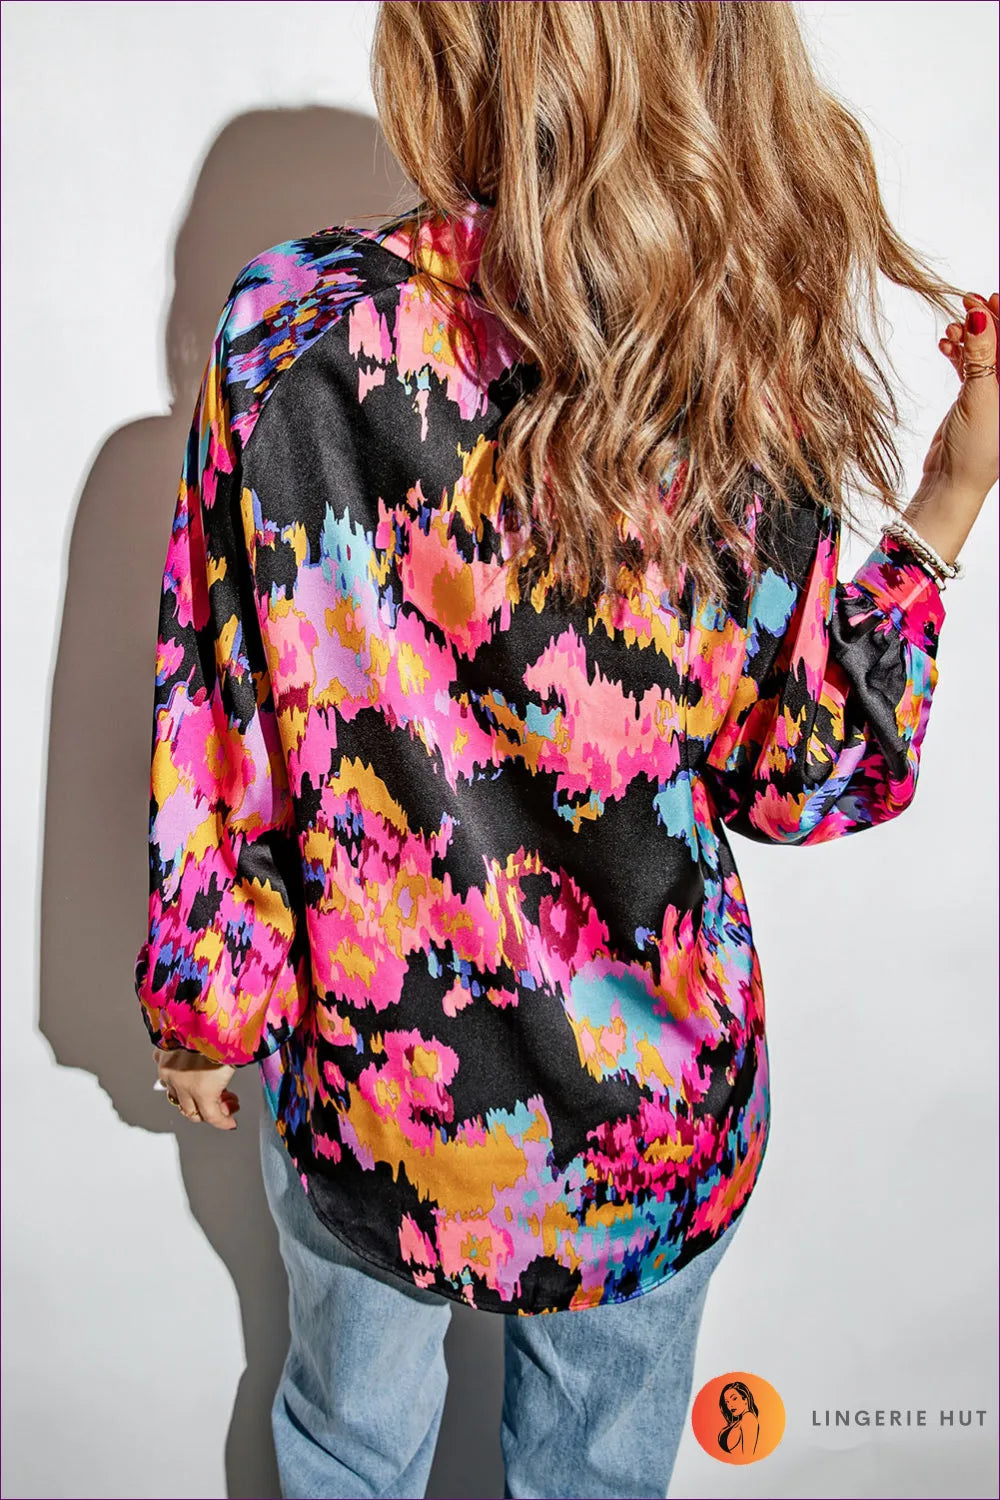 Breathe In Eye-catching Style With Our Purple Graffiti Print Blouse. Bold And Daring, This Blouse Draws